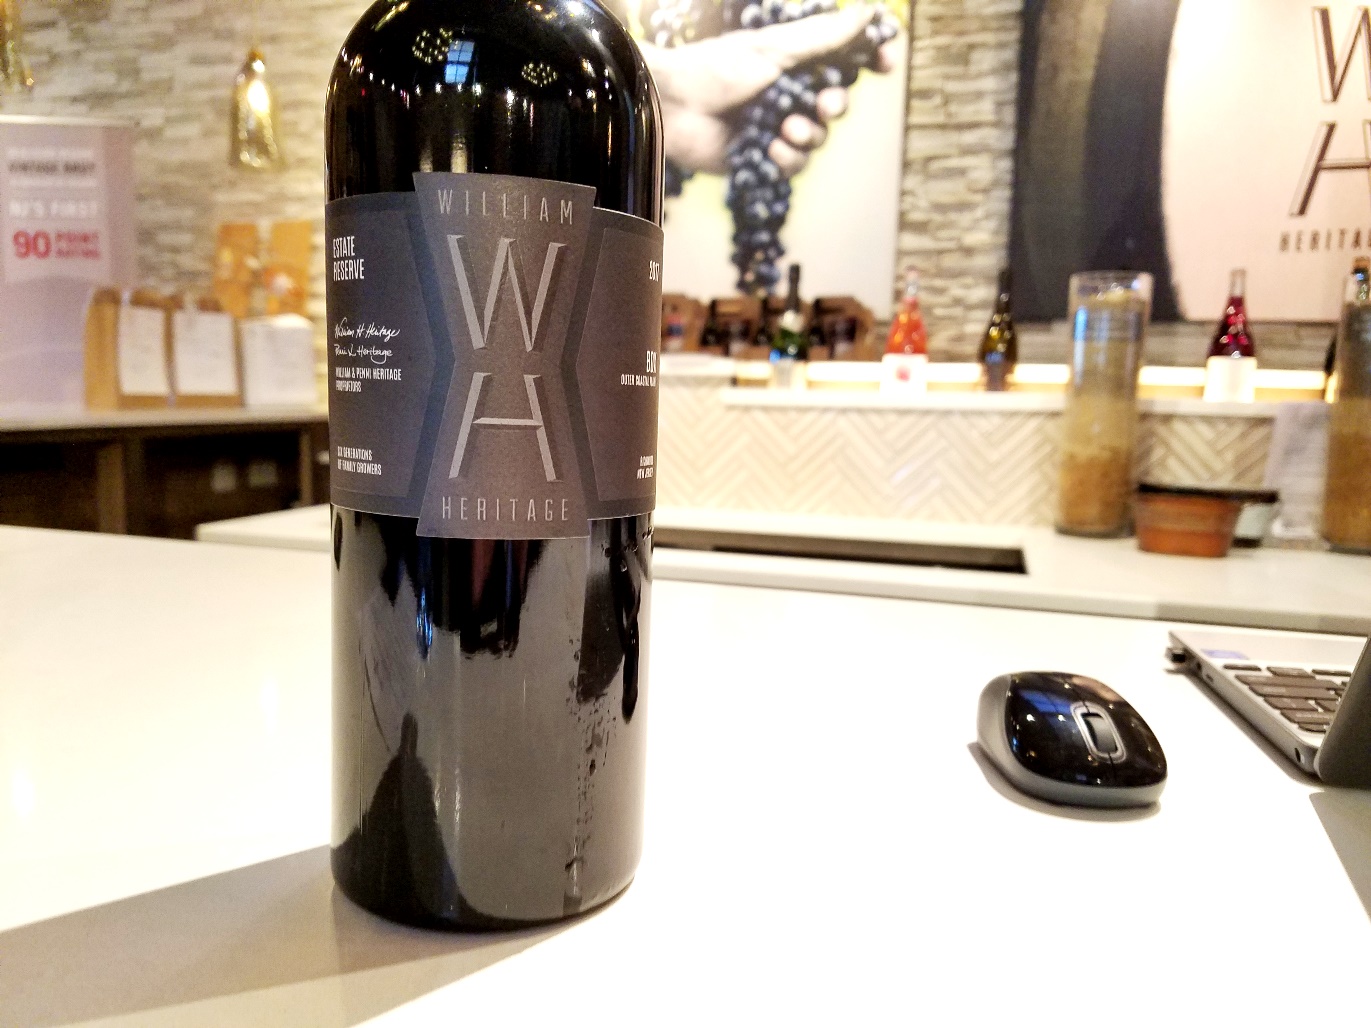 William Heritage Winery, Estate Reserve BDX 2017, Outer Coastal Plain, New Jersey, Wine Casual